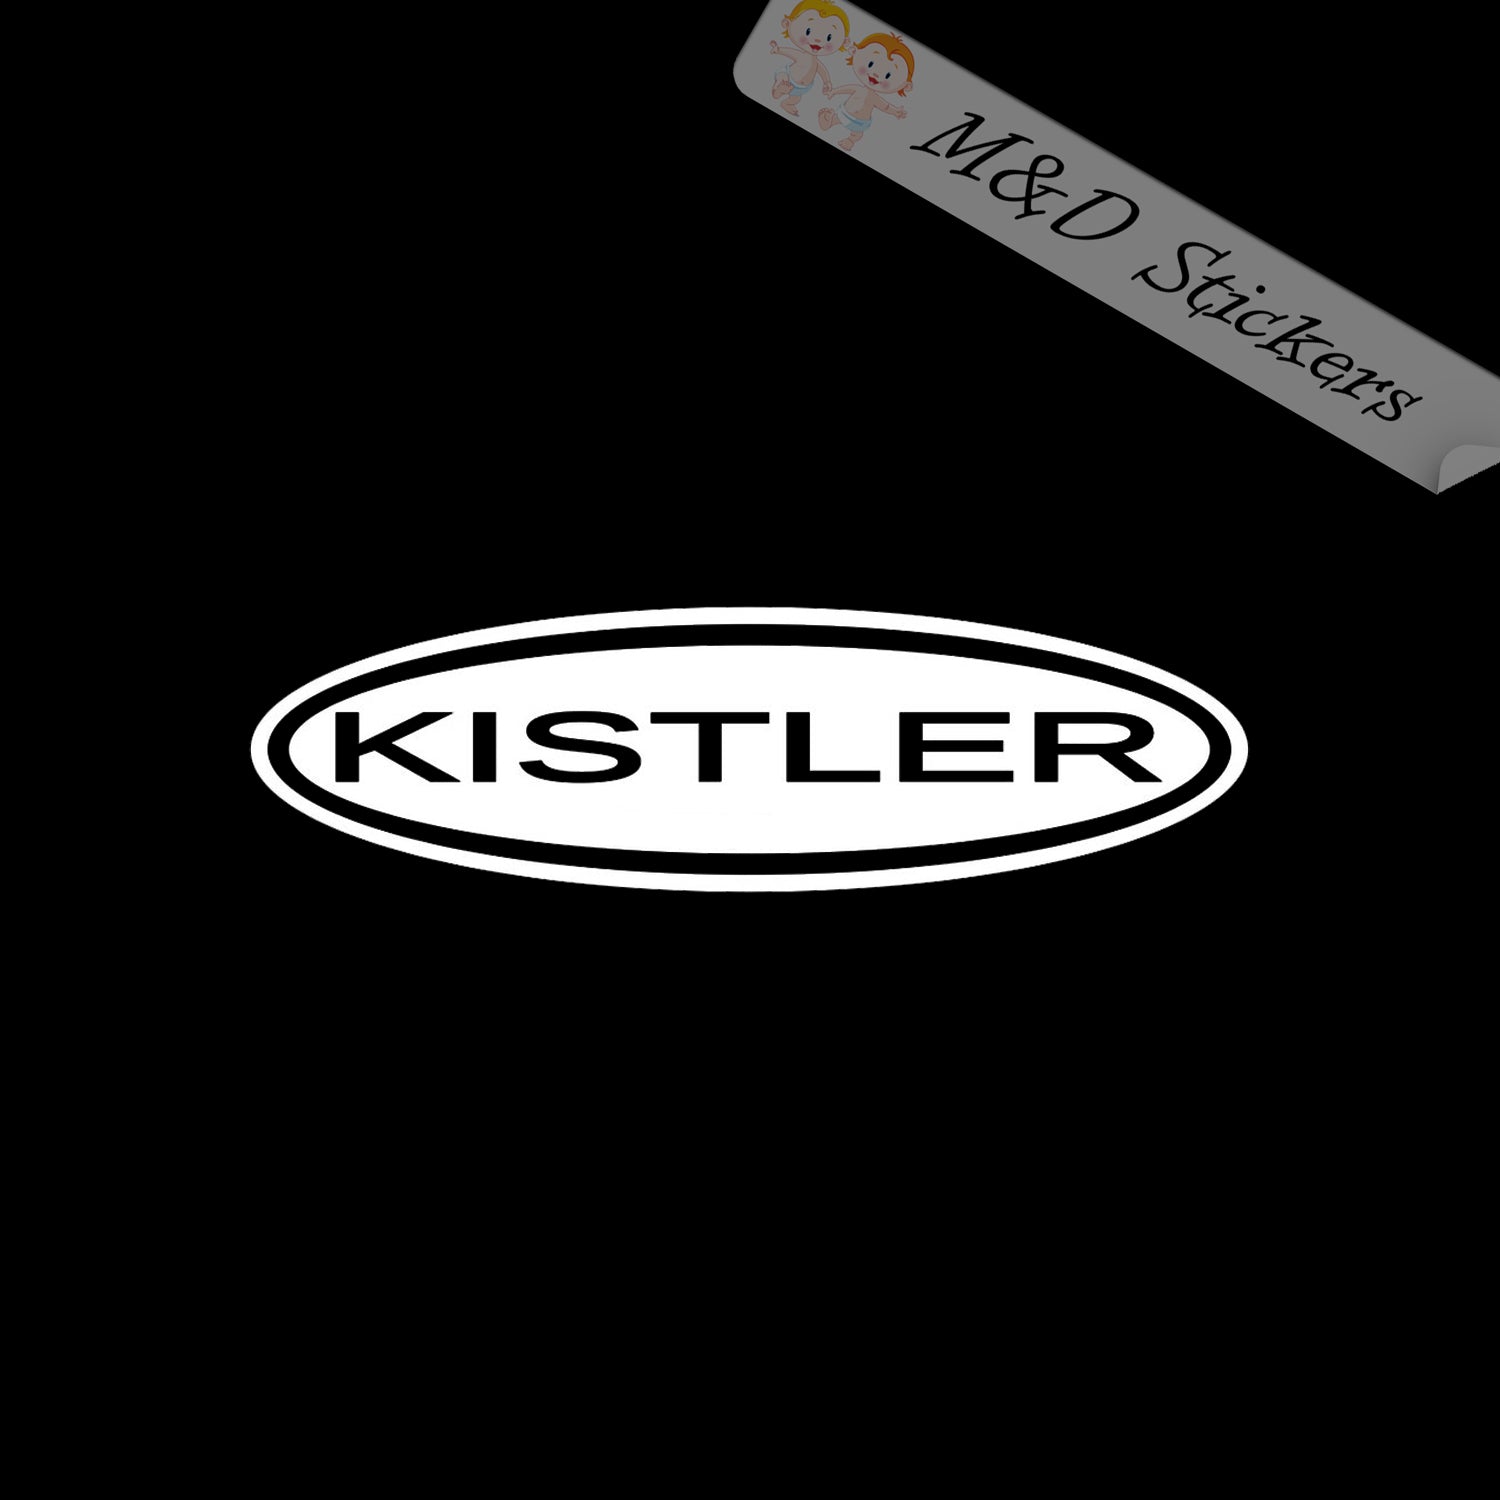 Kistler Fishing Rods (4.5 - 30) Vinyl Decal in Different colors & si –  M&D Stickers